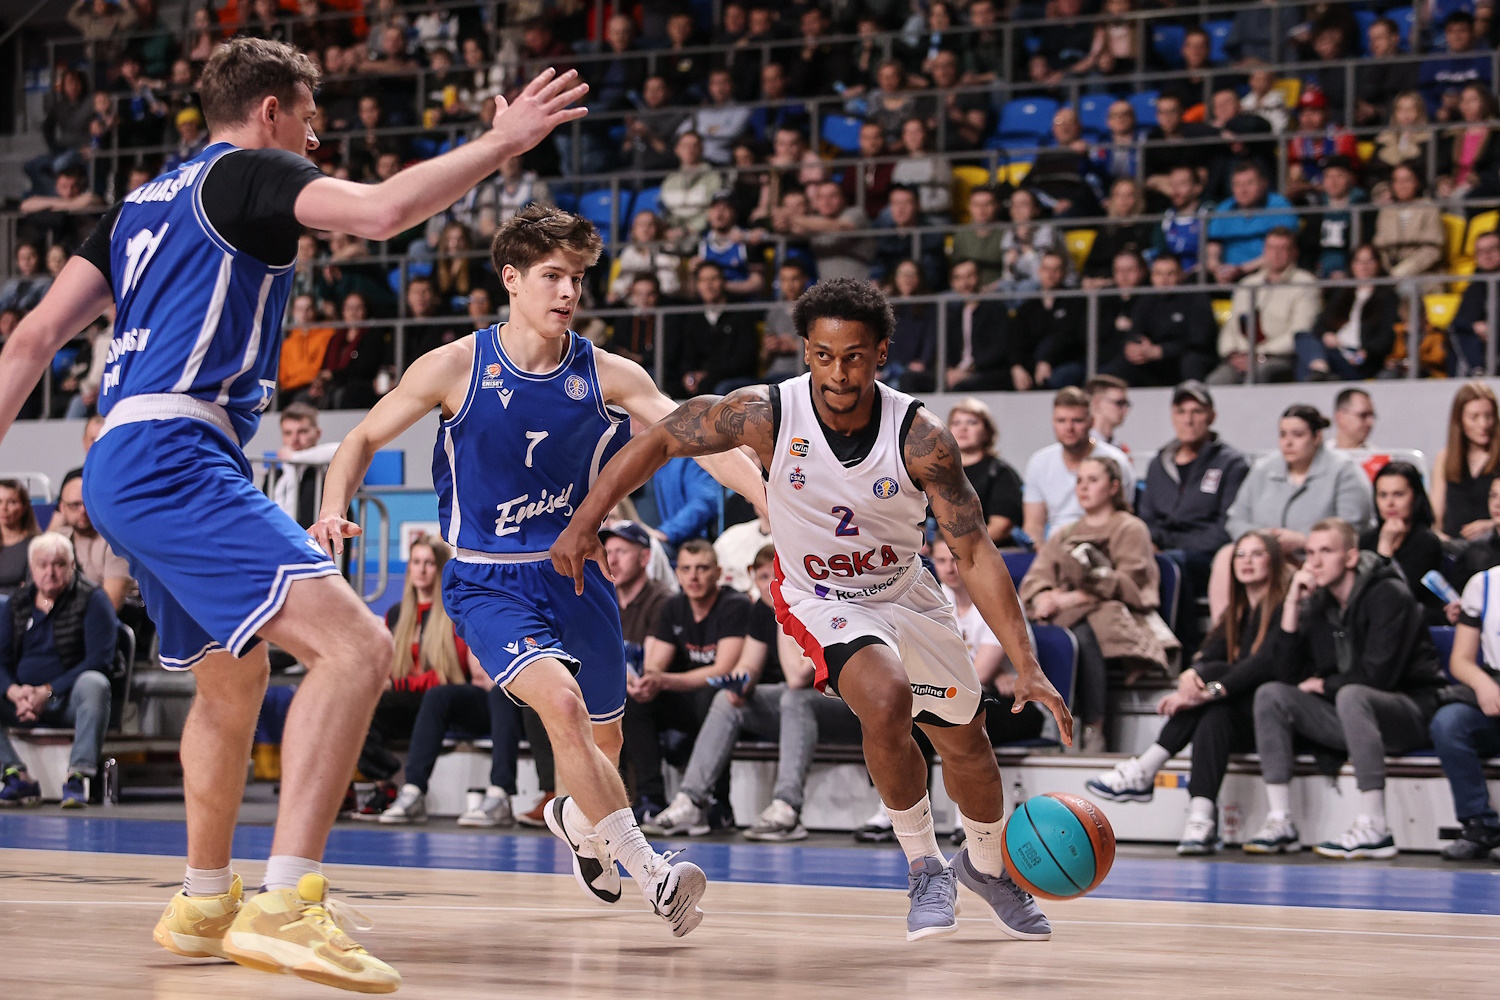 Casper Ware scored 22 points and 8 assists in Game 3 against Enisey